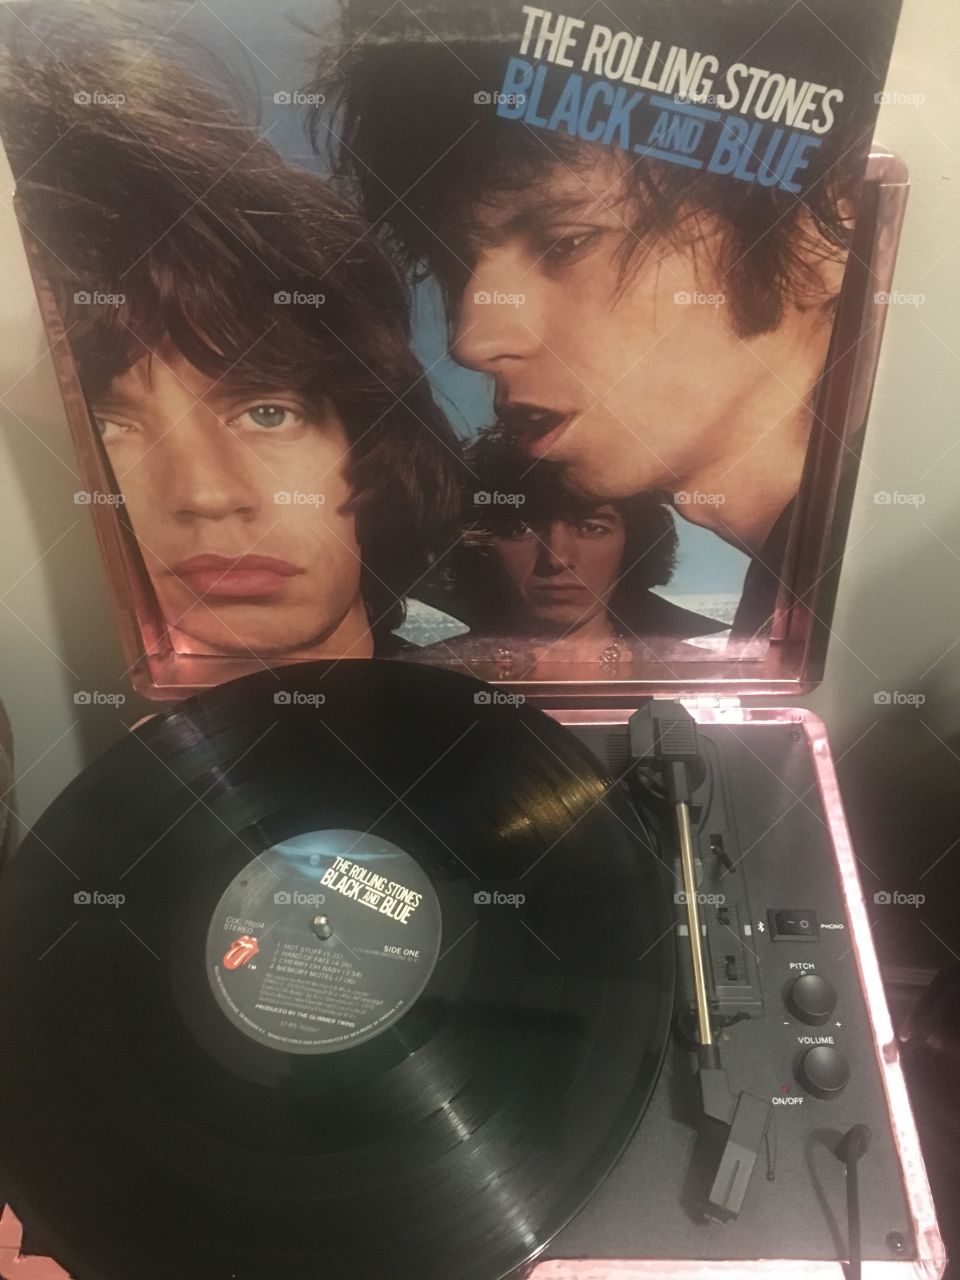 Listening to the Rolling Stones on Vinyl